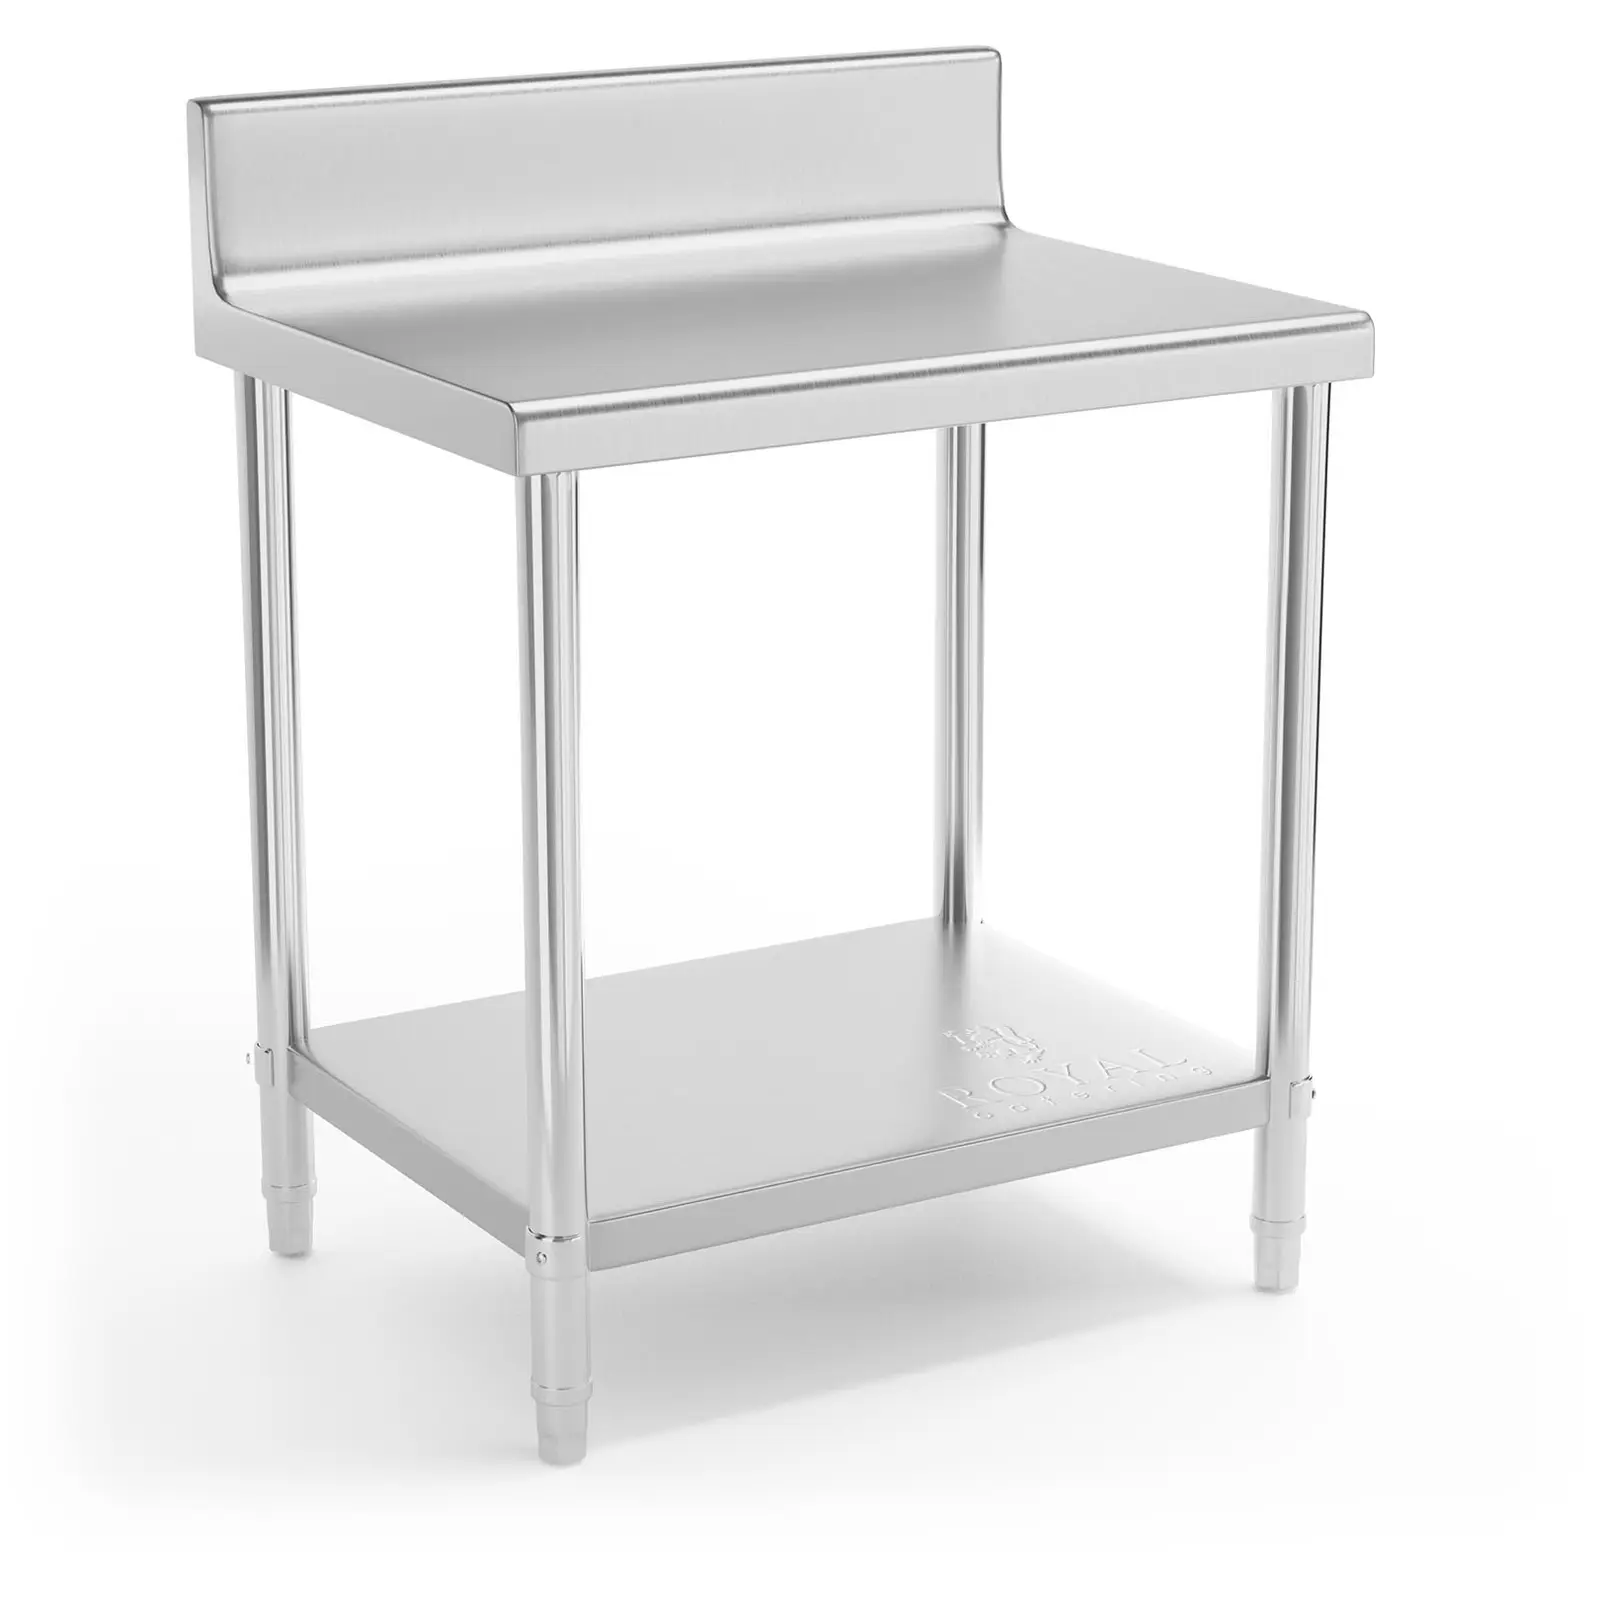 Stainless Steel Work Table - 80 x 60 cm - upstand - 190 kg load capacity